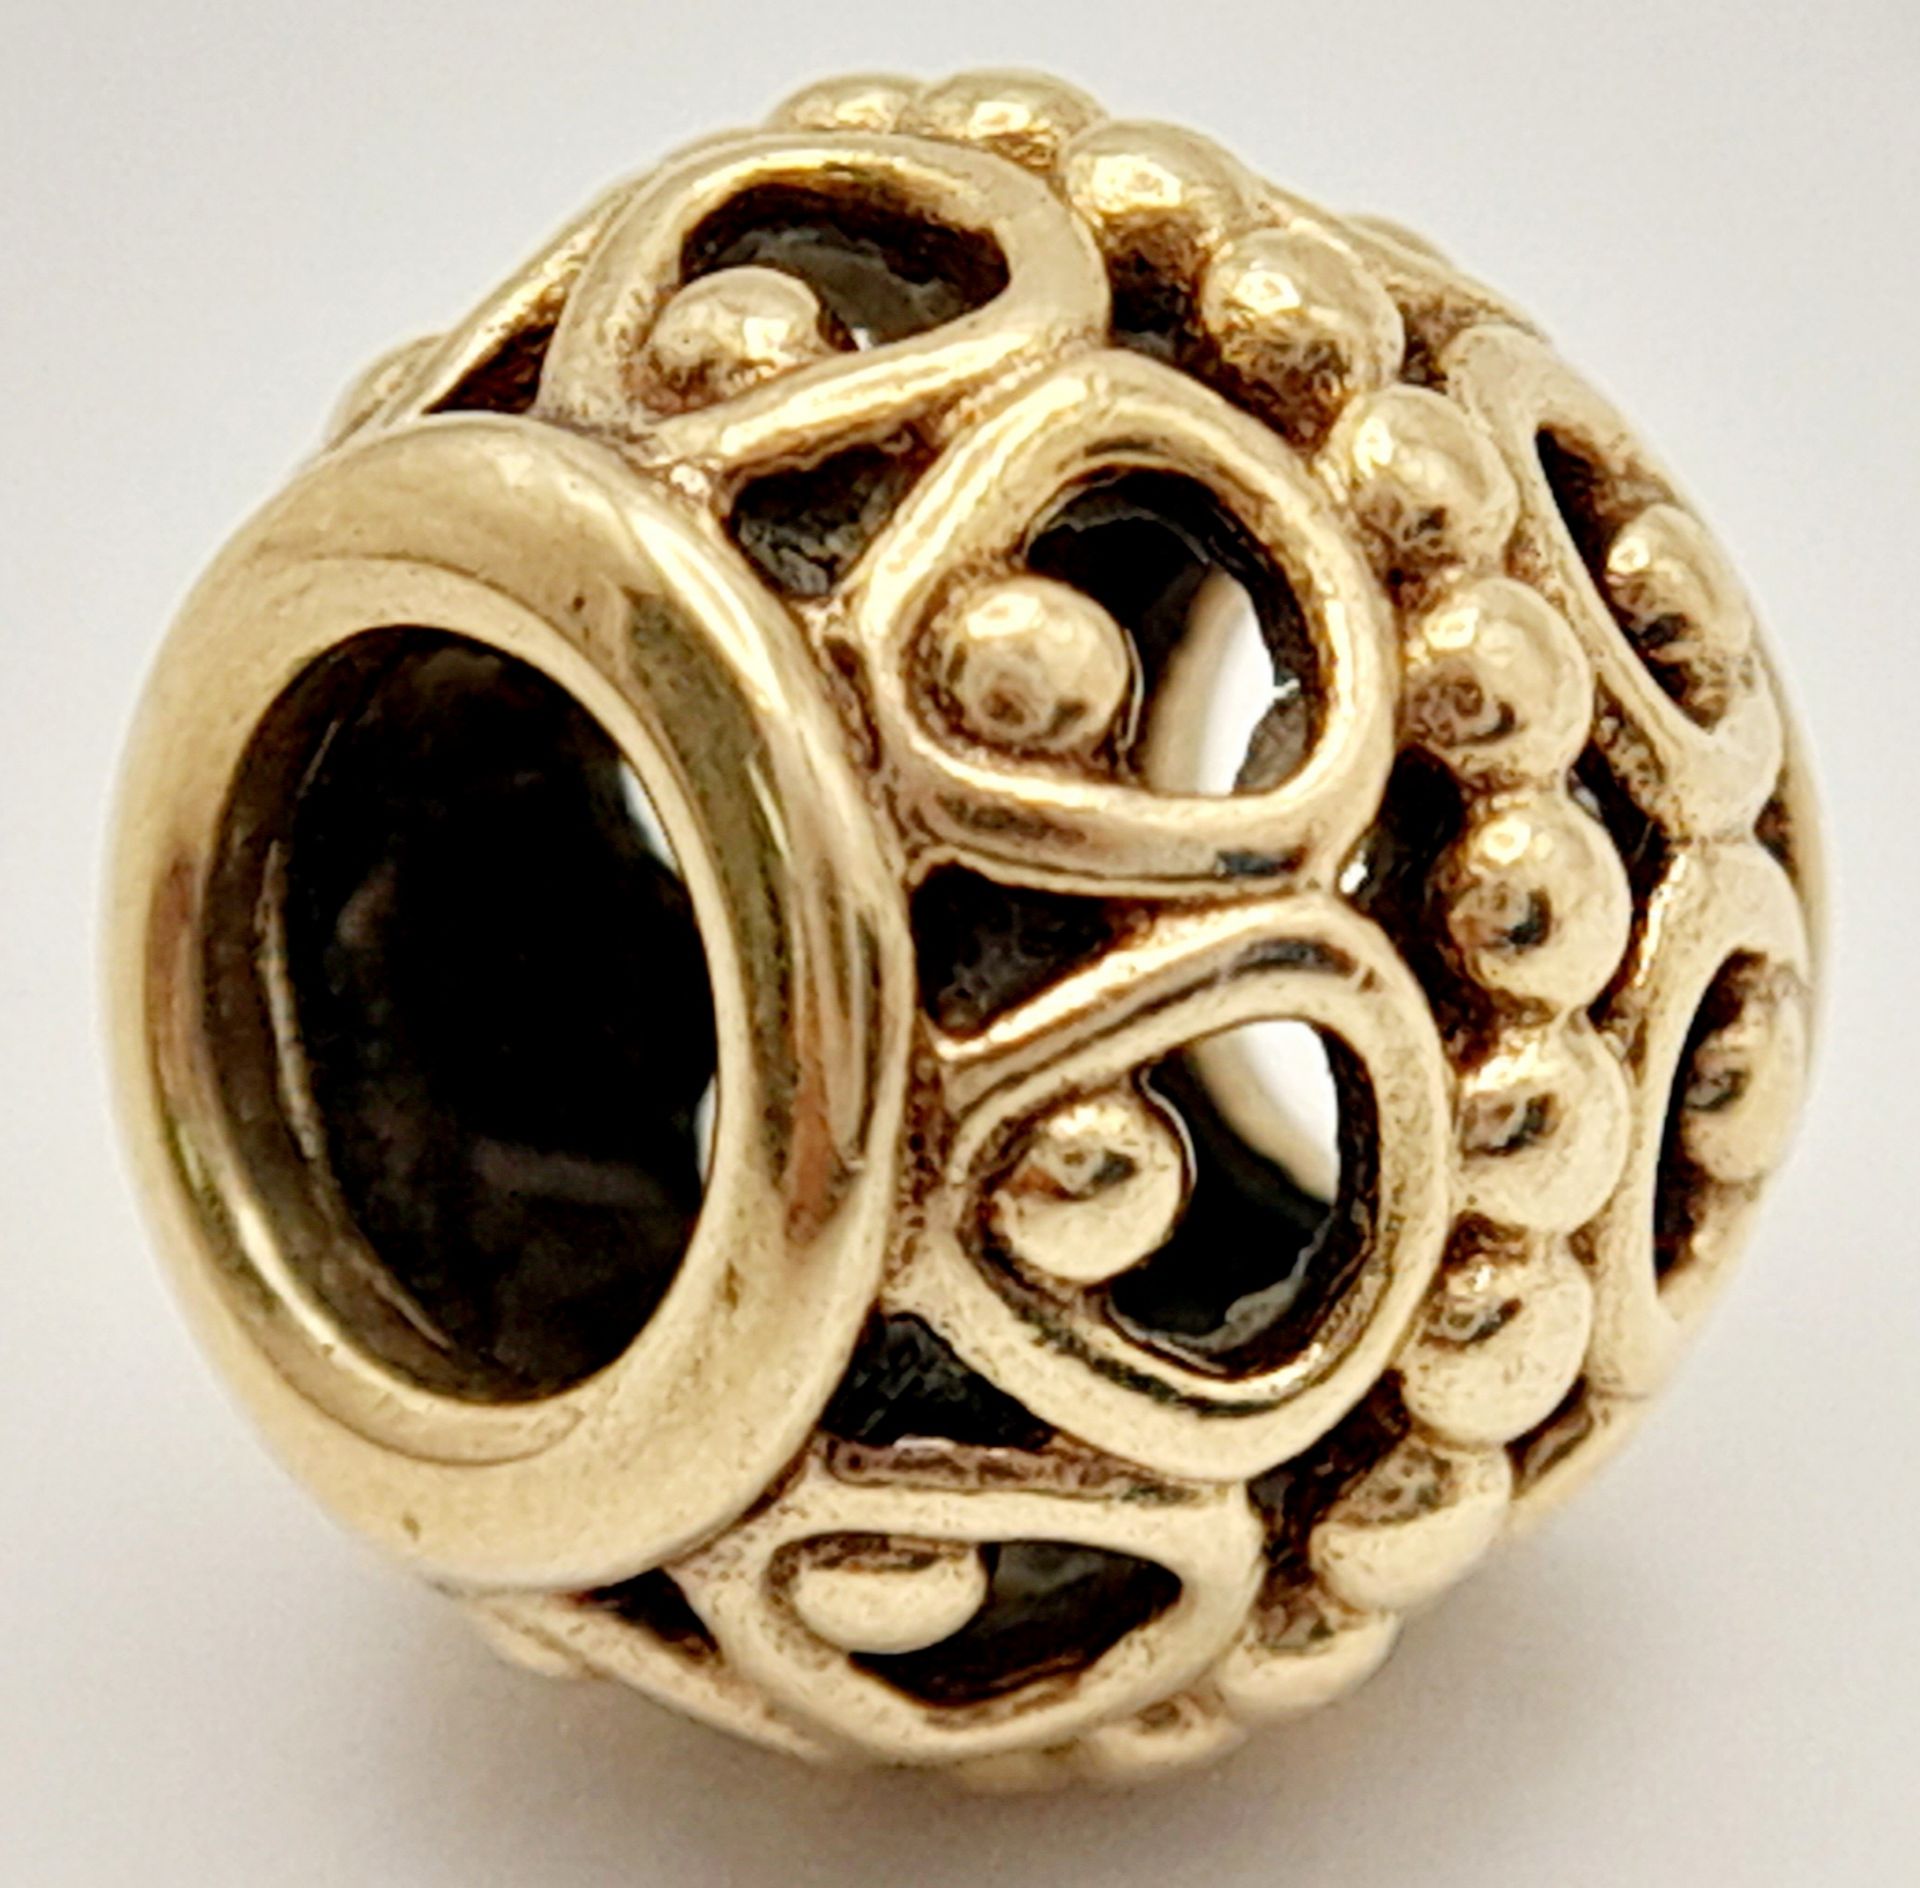 A 14K YELLOW GOLD PANDORA CHARM. 9mm length, 2.2g weight. Ref: SC 8135 - Image 2 of 6